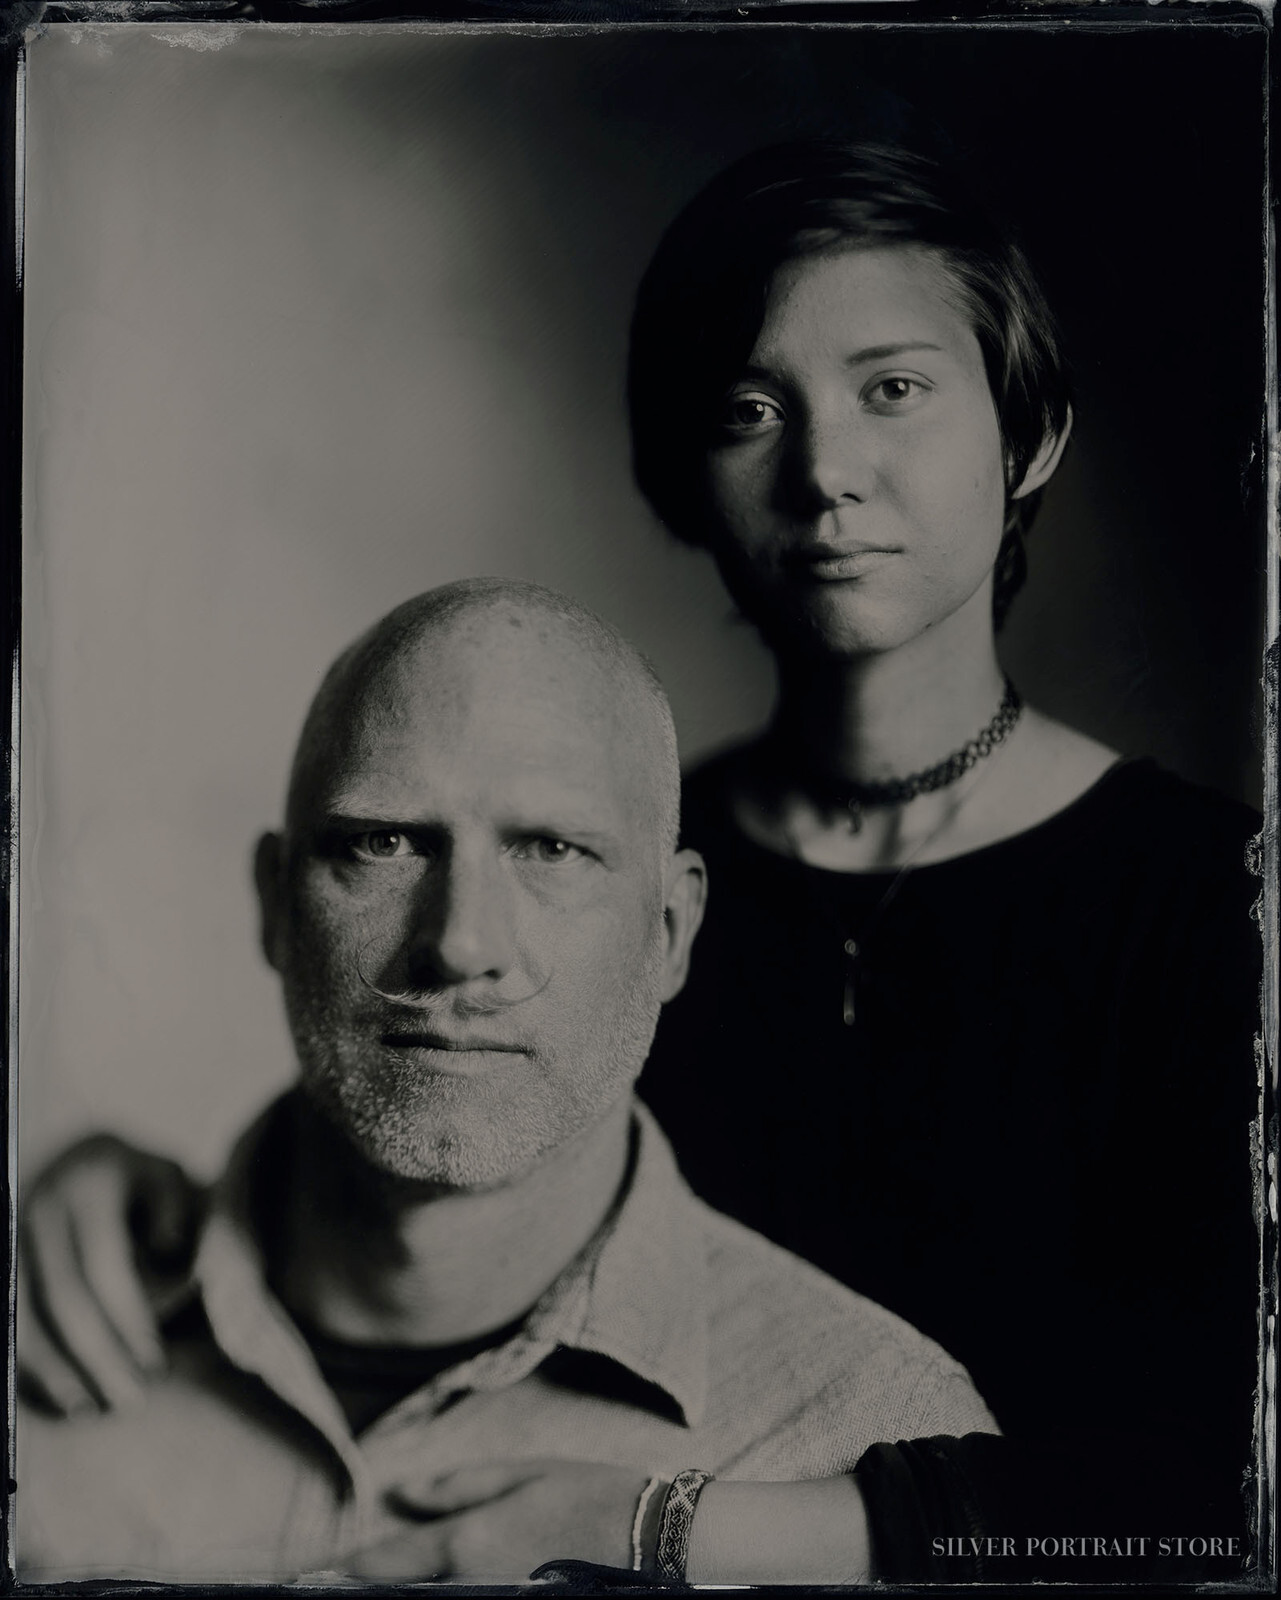 Paul & Antonia-Silver Portrait Store-scan from Wet plate collodion-Black glass Ambrotype 20 x 25 cm.